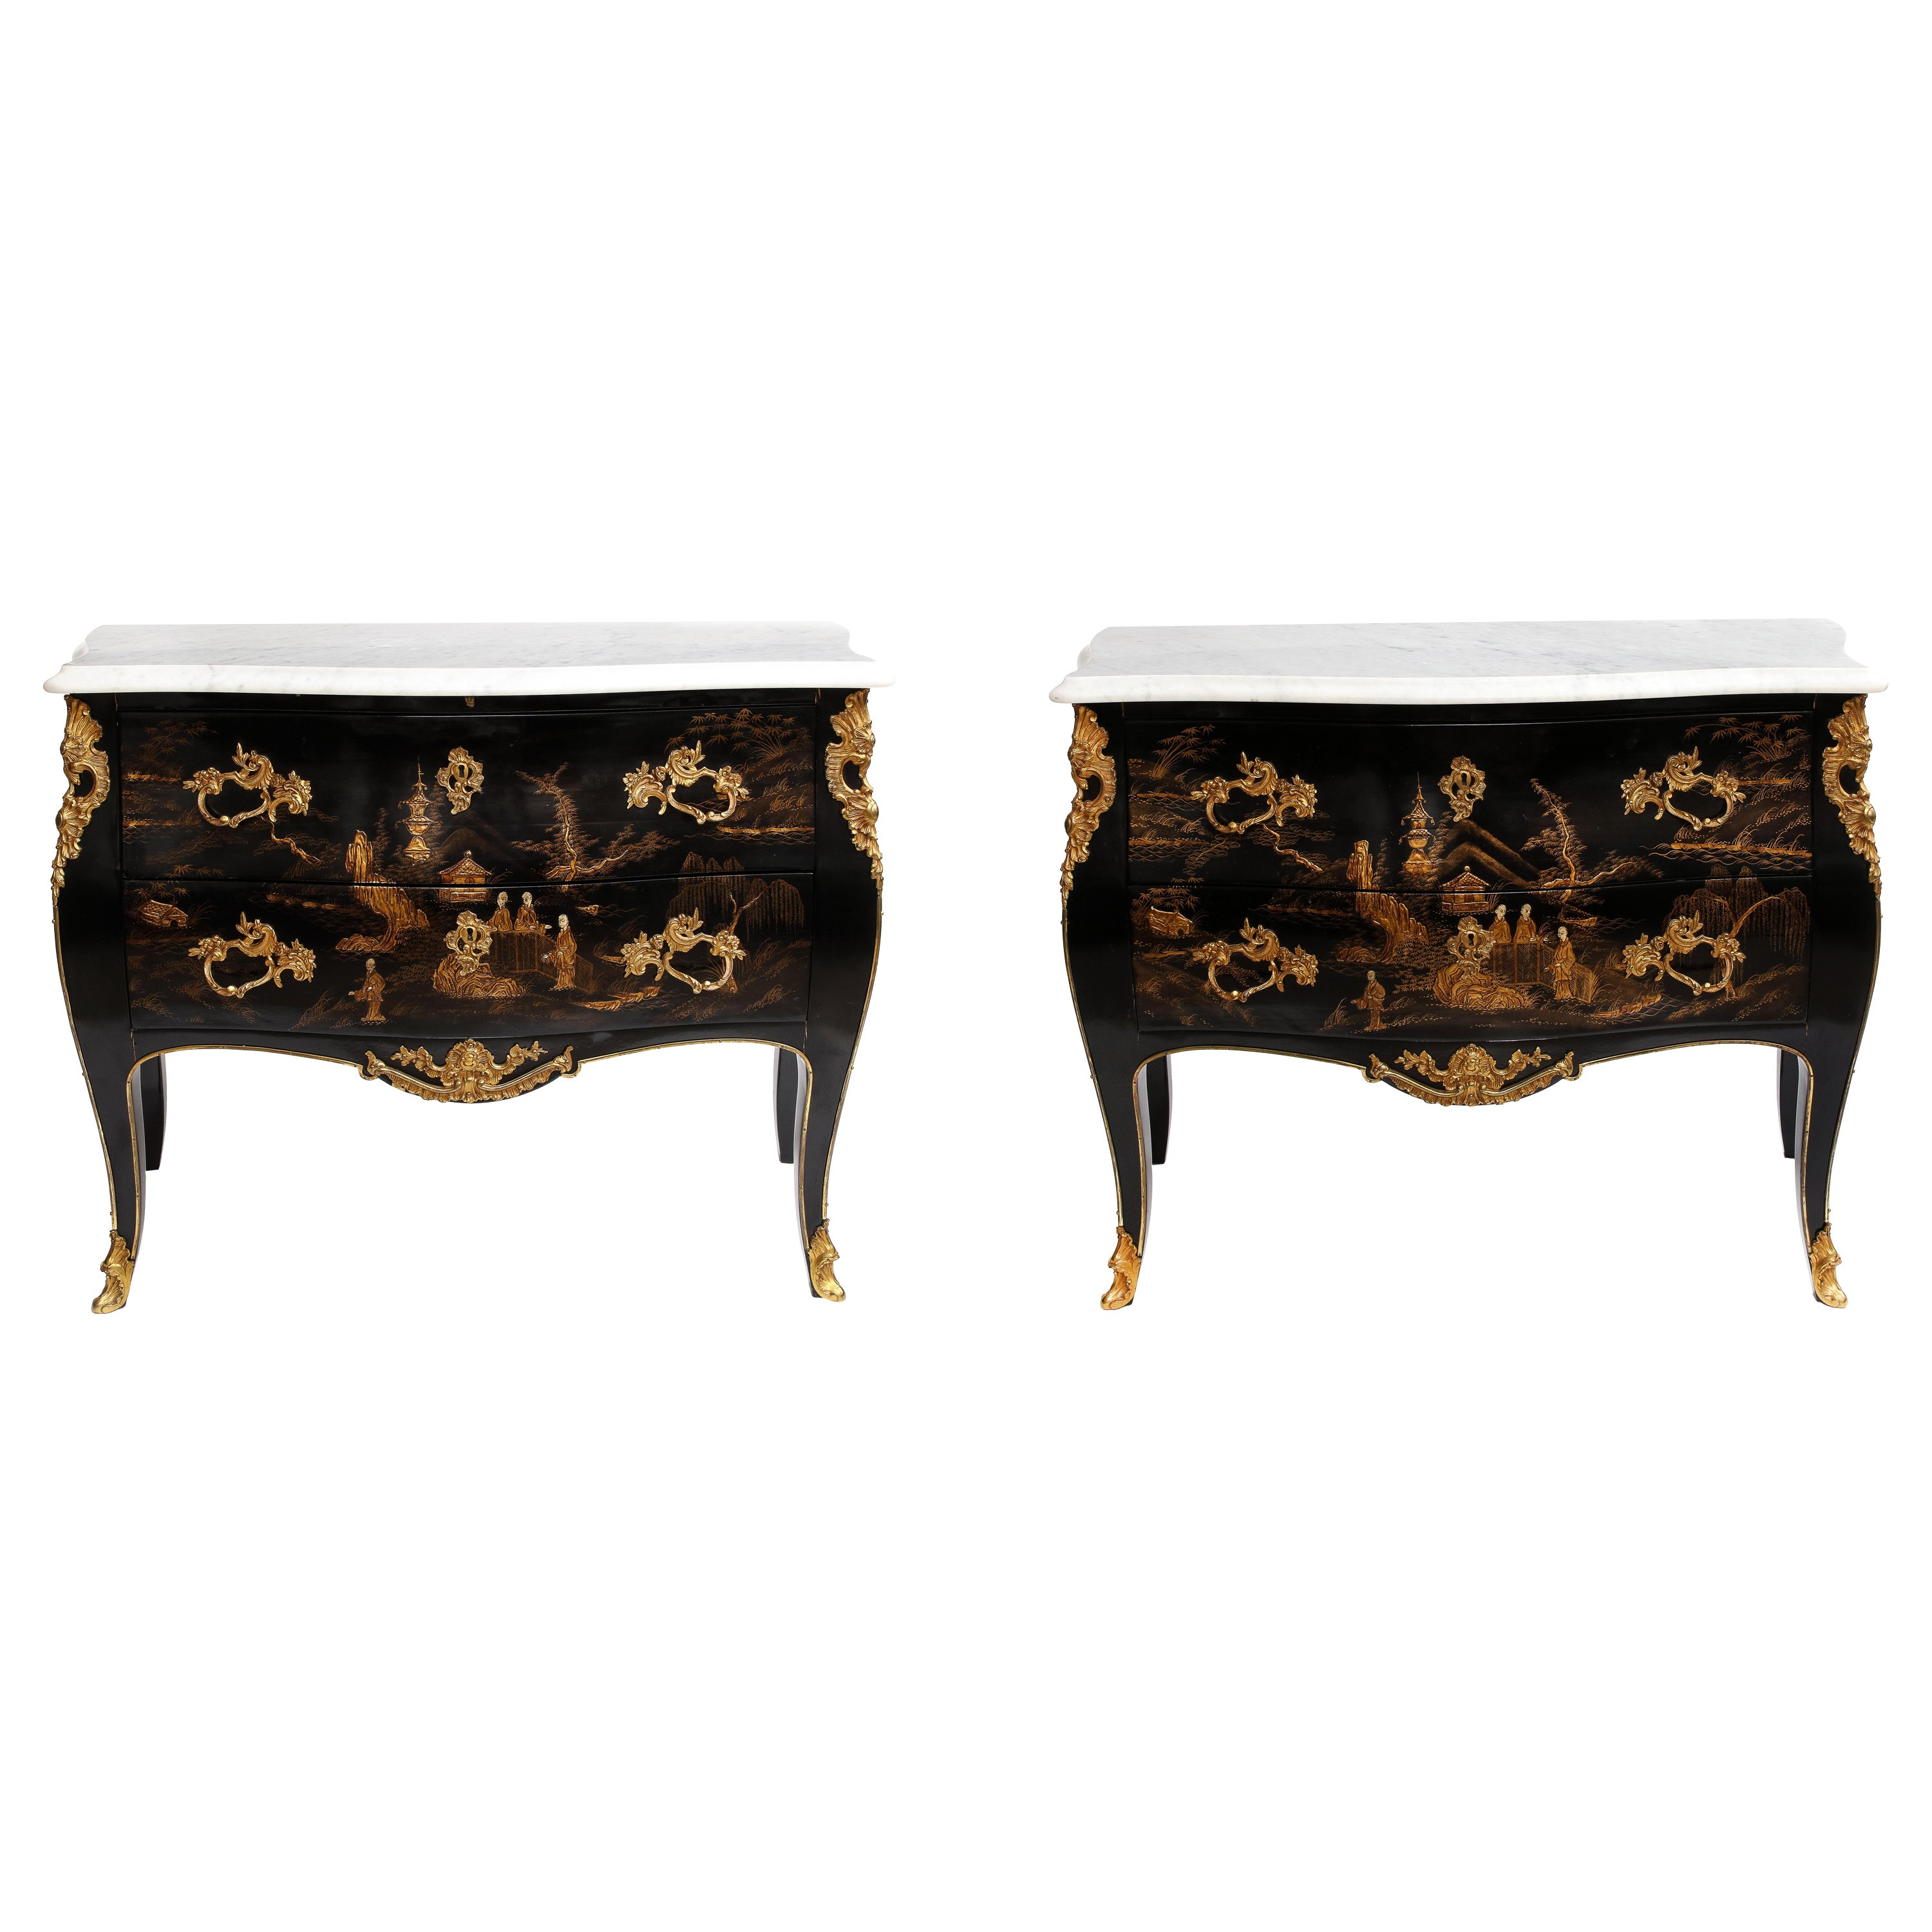 A Pair of French Chinoiserie Lacquered & Gilt Marble Top 2-Drawer Commodes For Sale